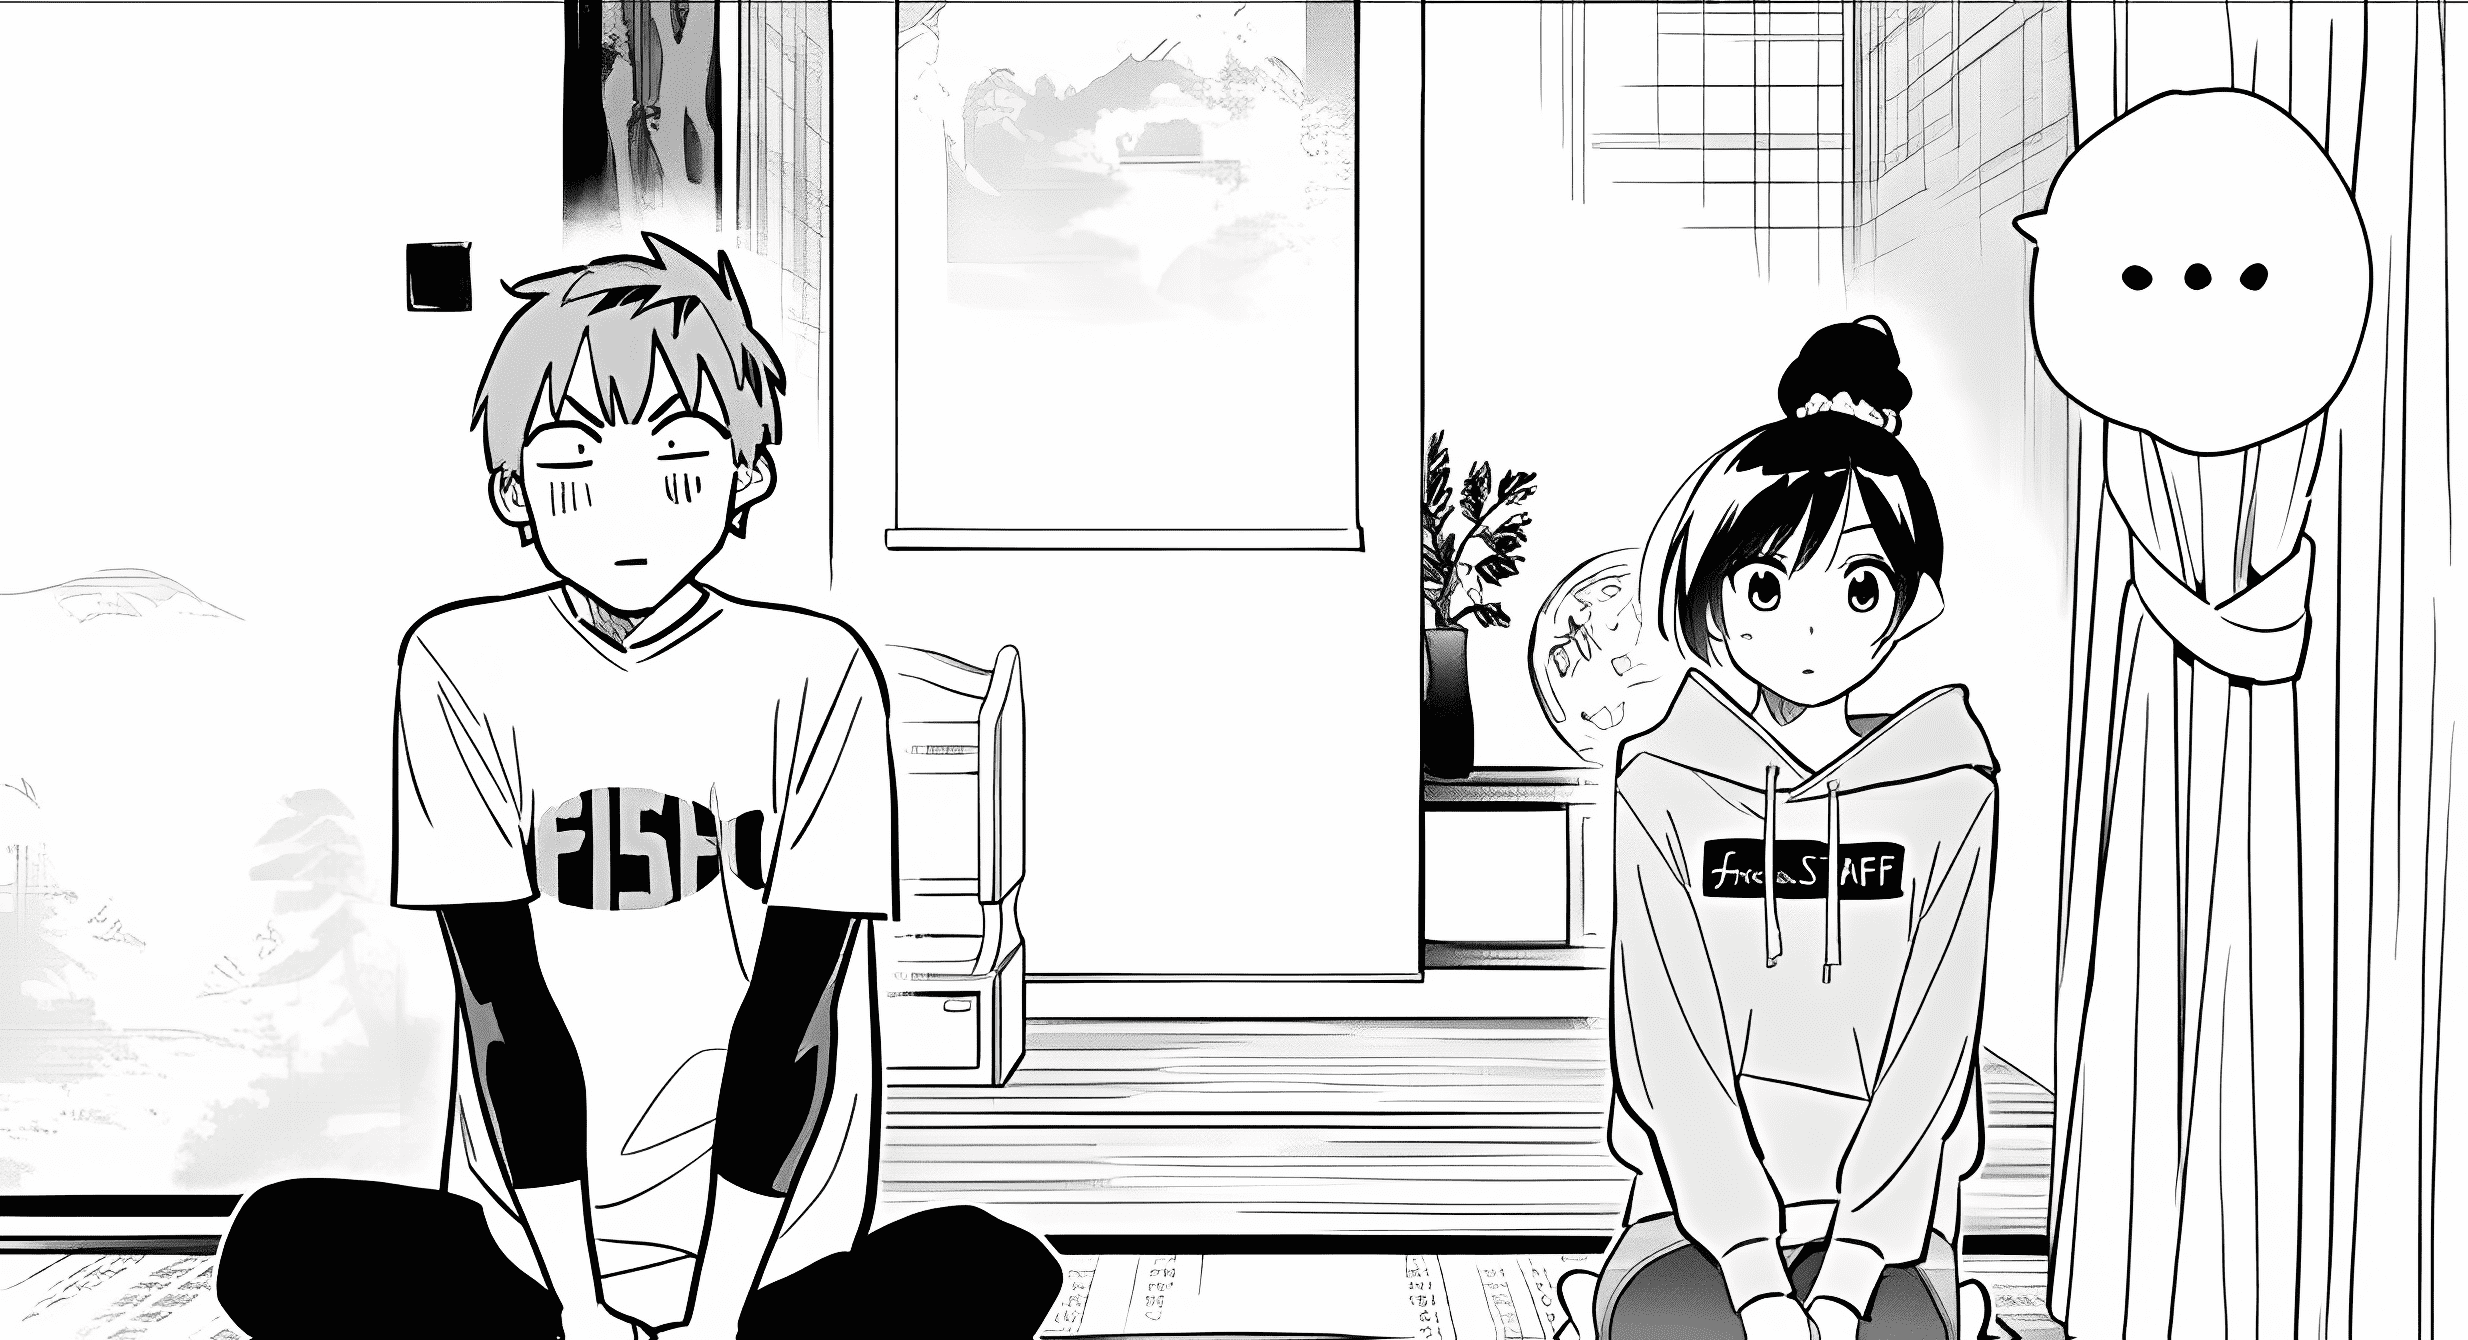 Rent a Girlfriend Chapter 292 Release Date